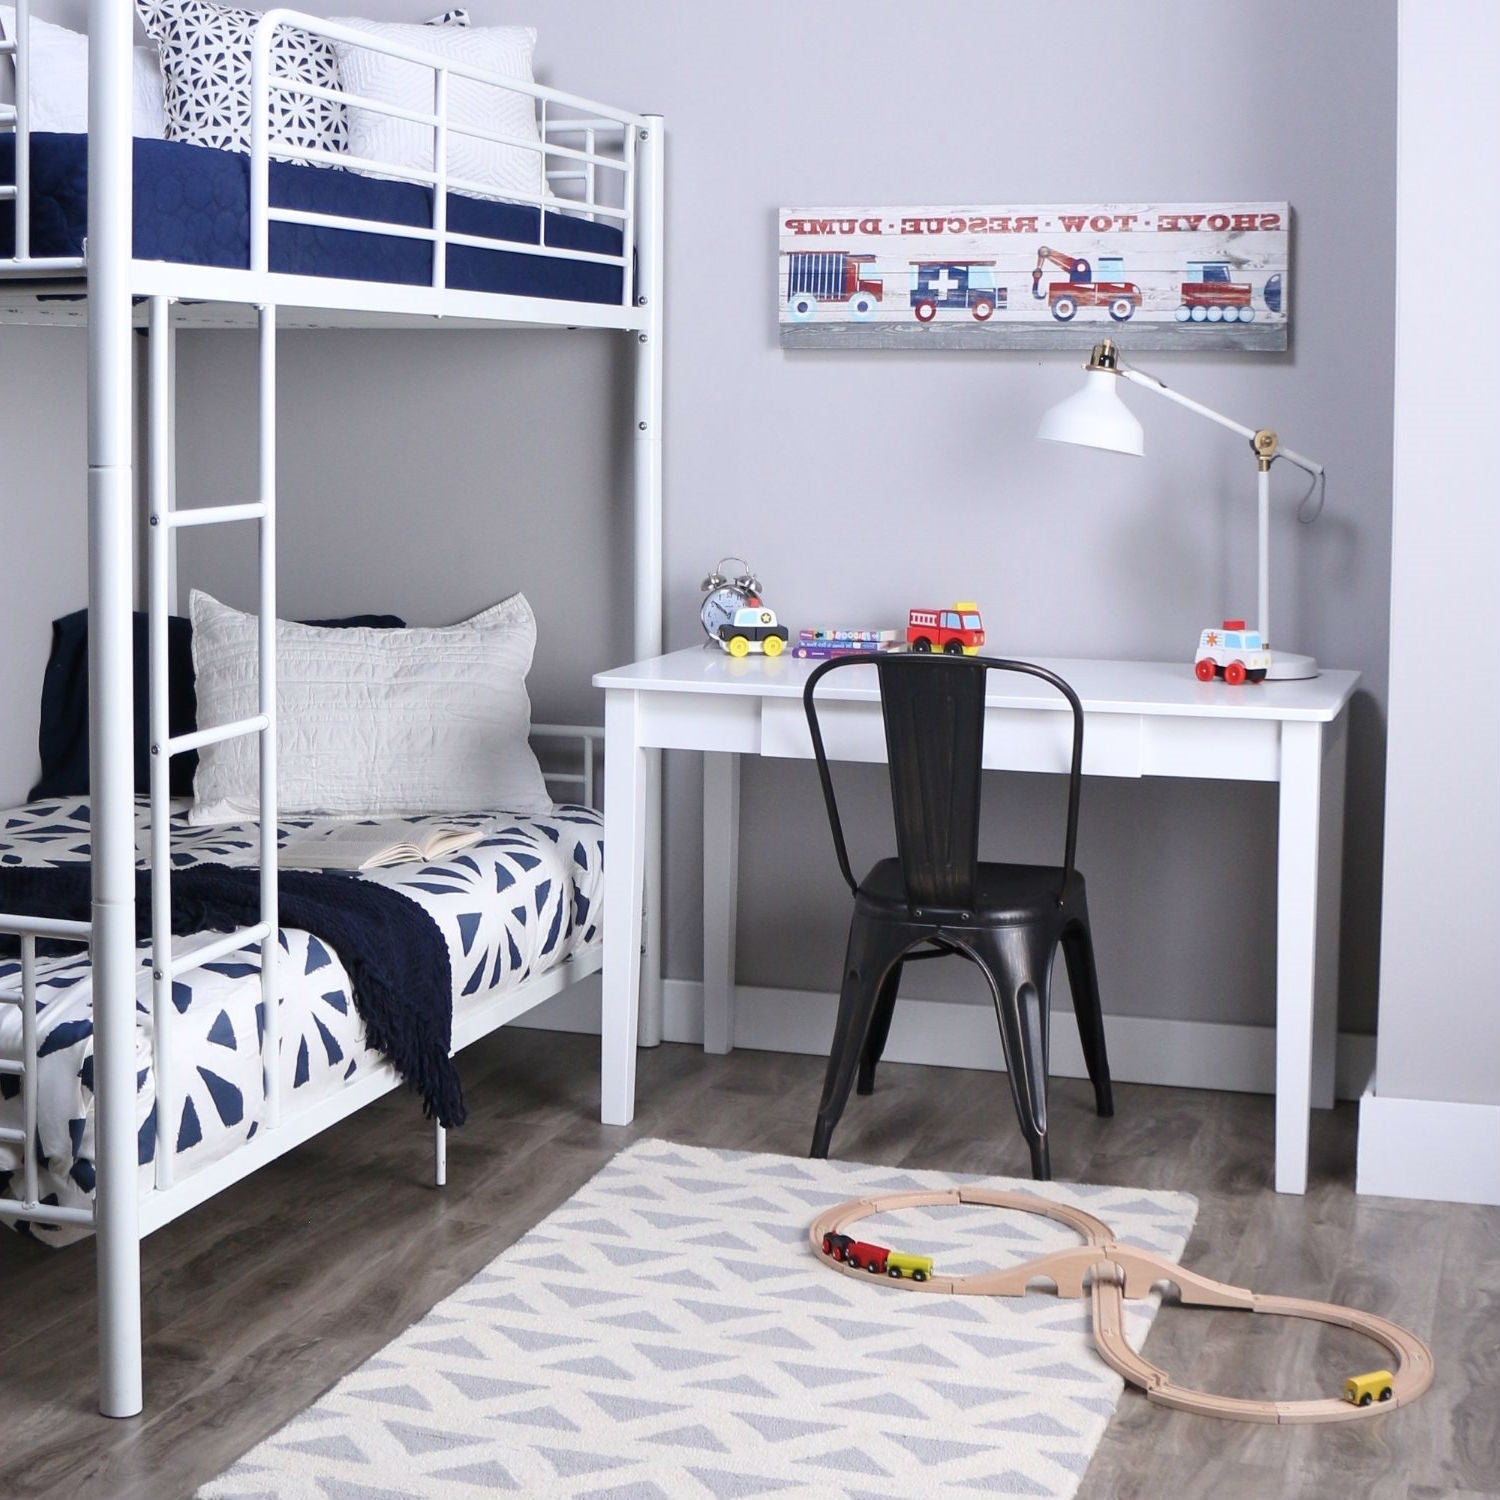 Bedroom > Bed Frames > Bunk Beds - Twin Over Twin Sturdy Steel Metal Bunk Bed In White Finish